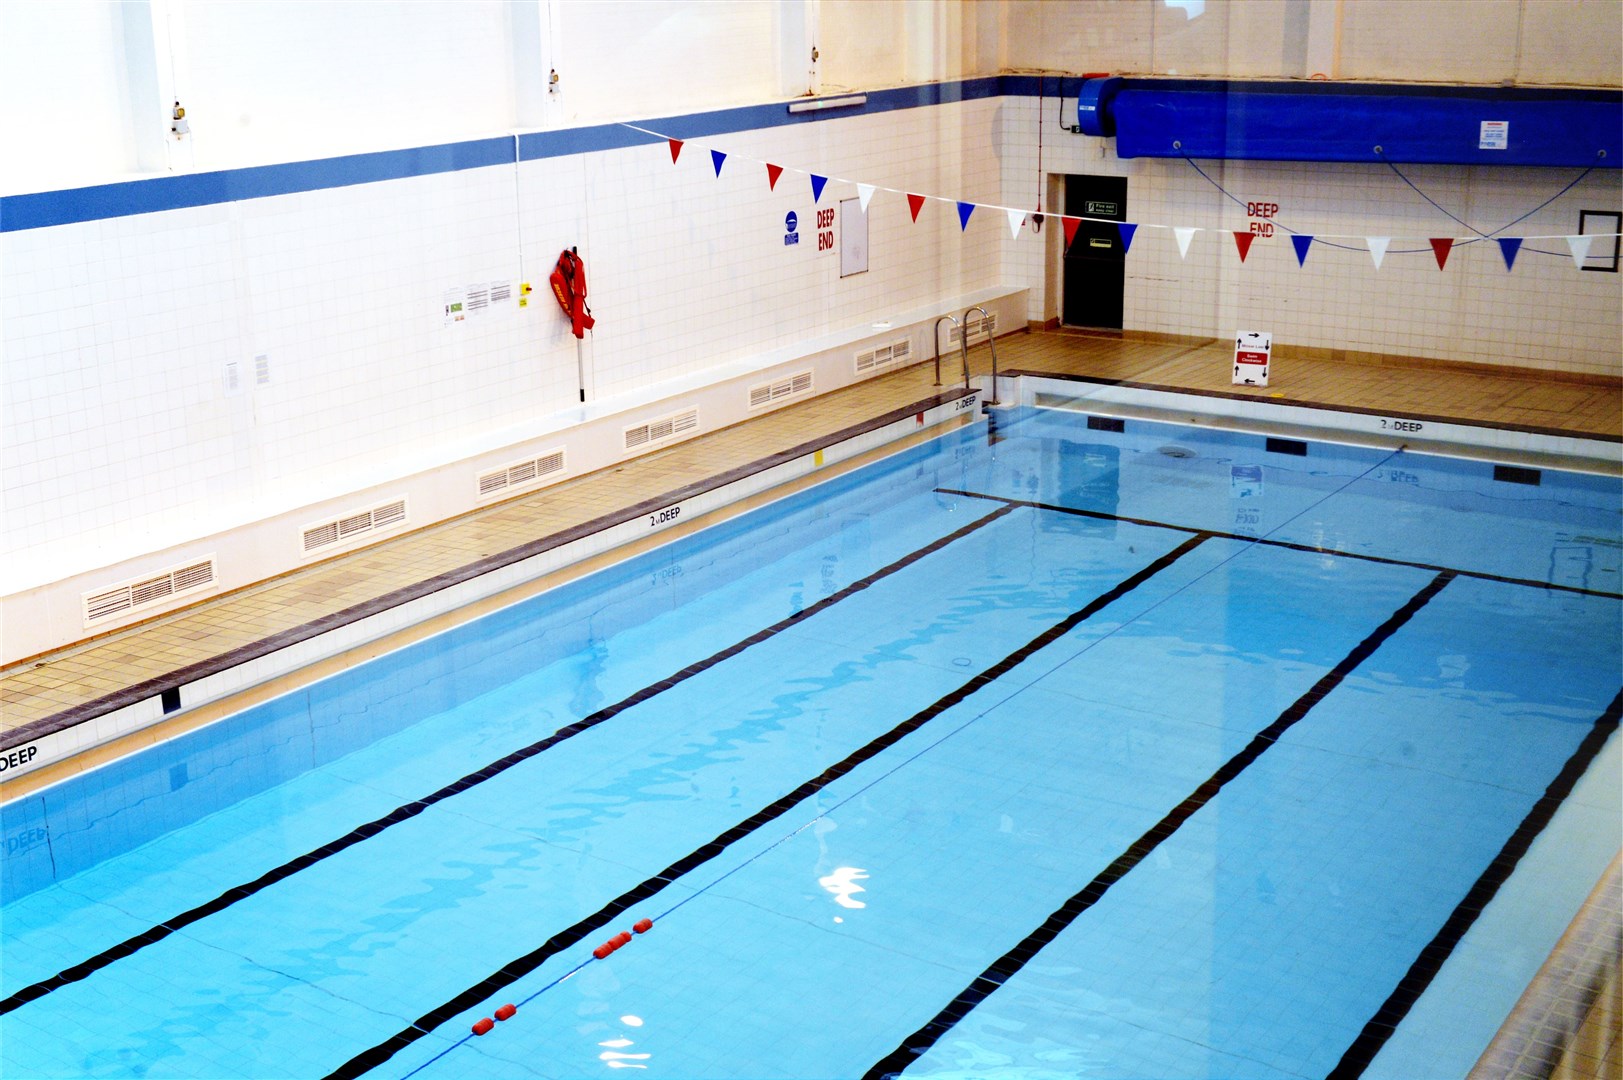 Dingwall Swimming Pool has closed 'due to unforeseen circumstances'. Picture: James Mackenzie